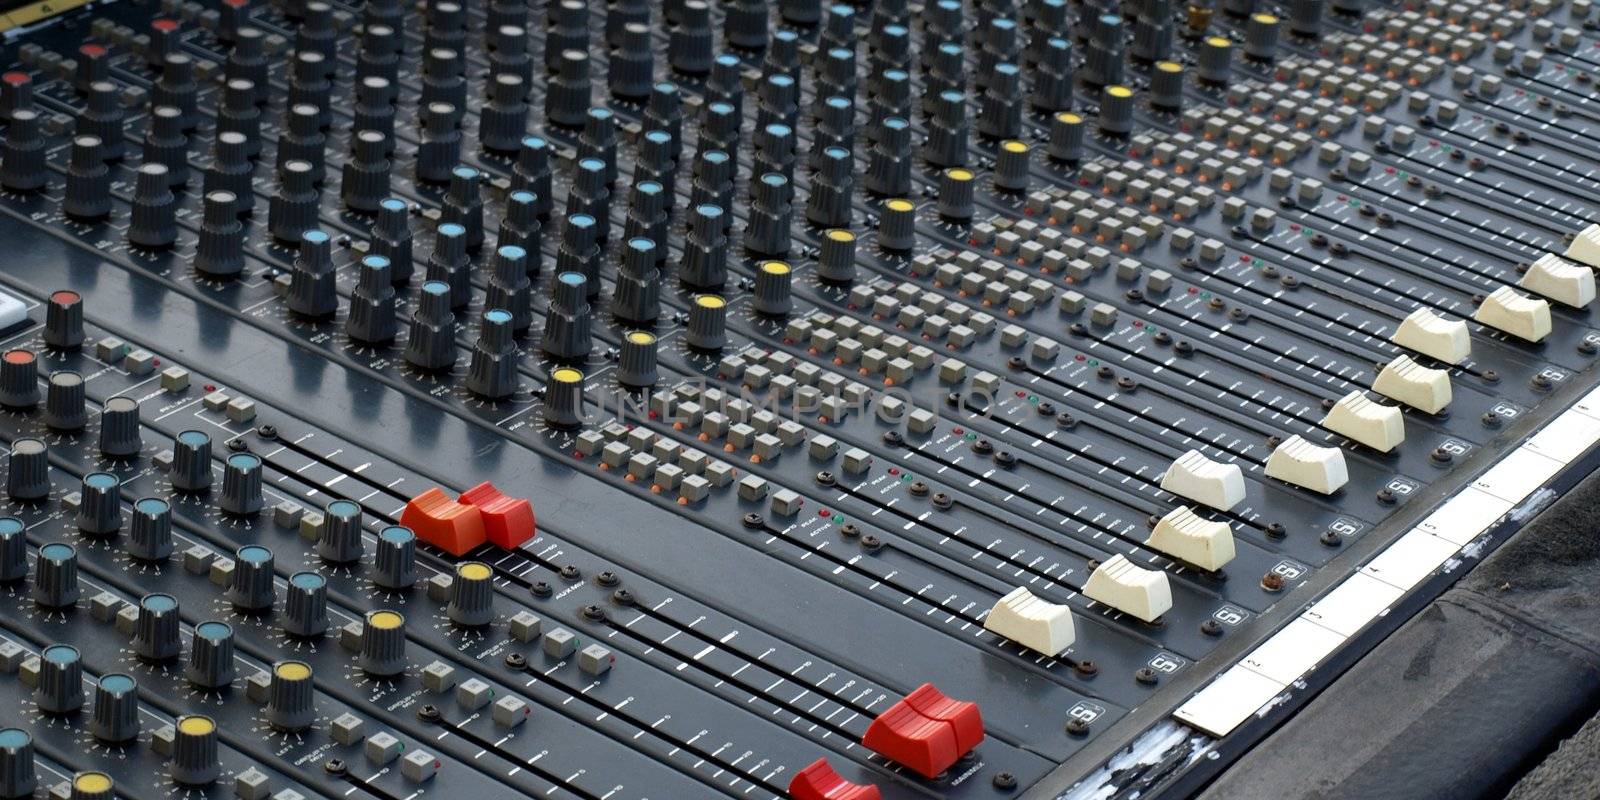 Detail of a soundboard mixer electronic device